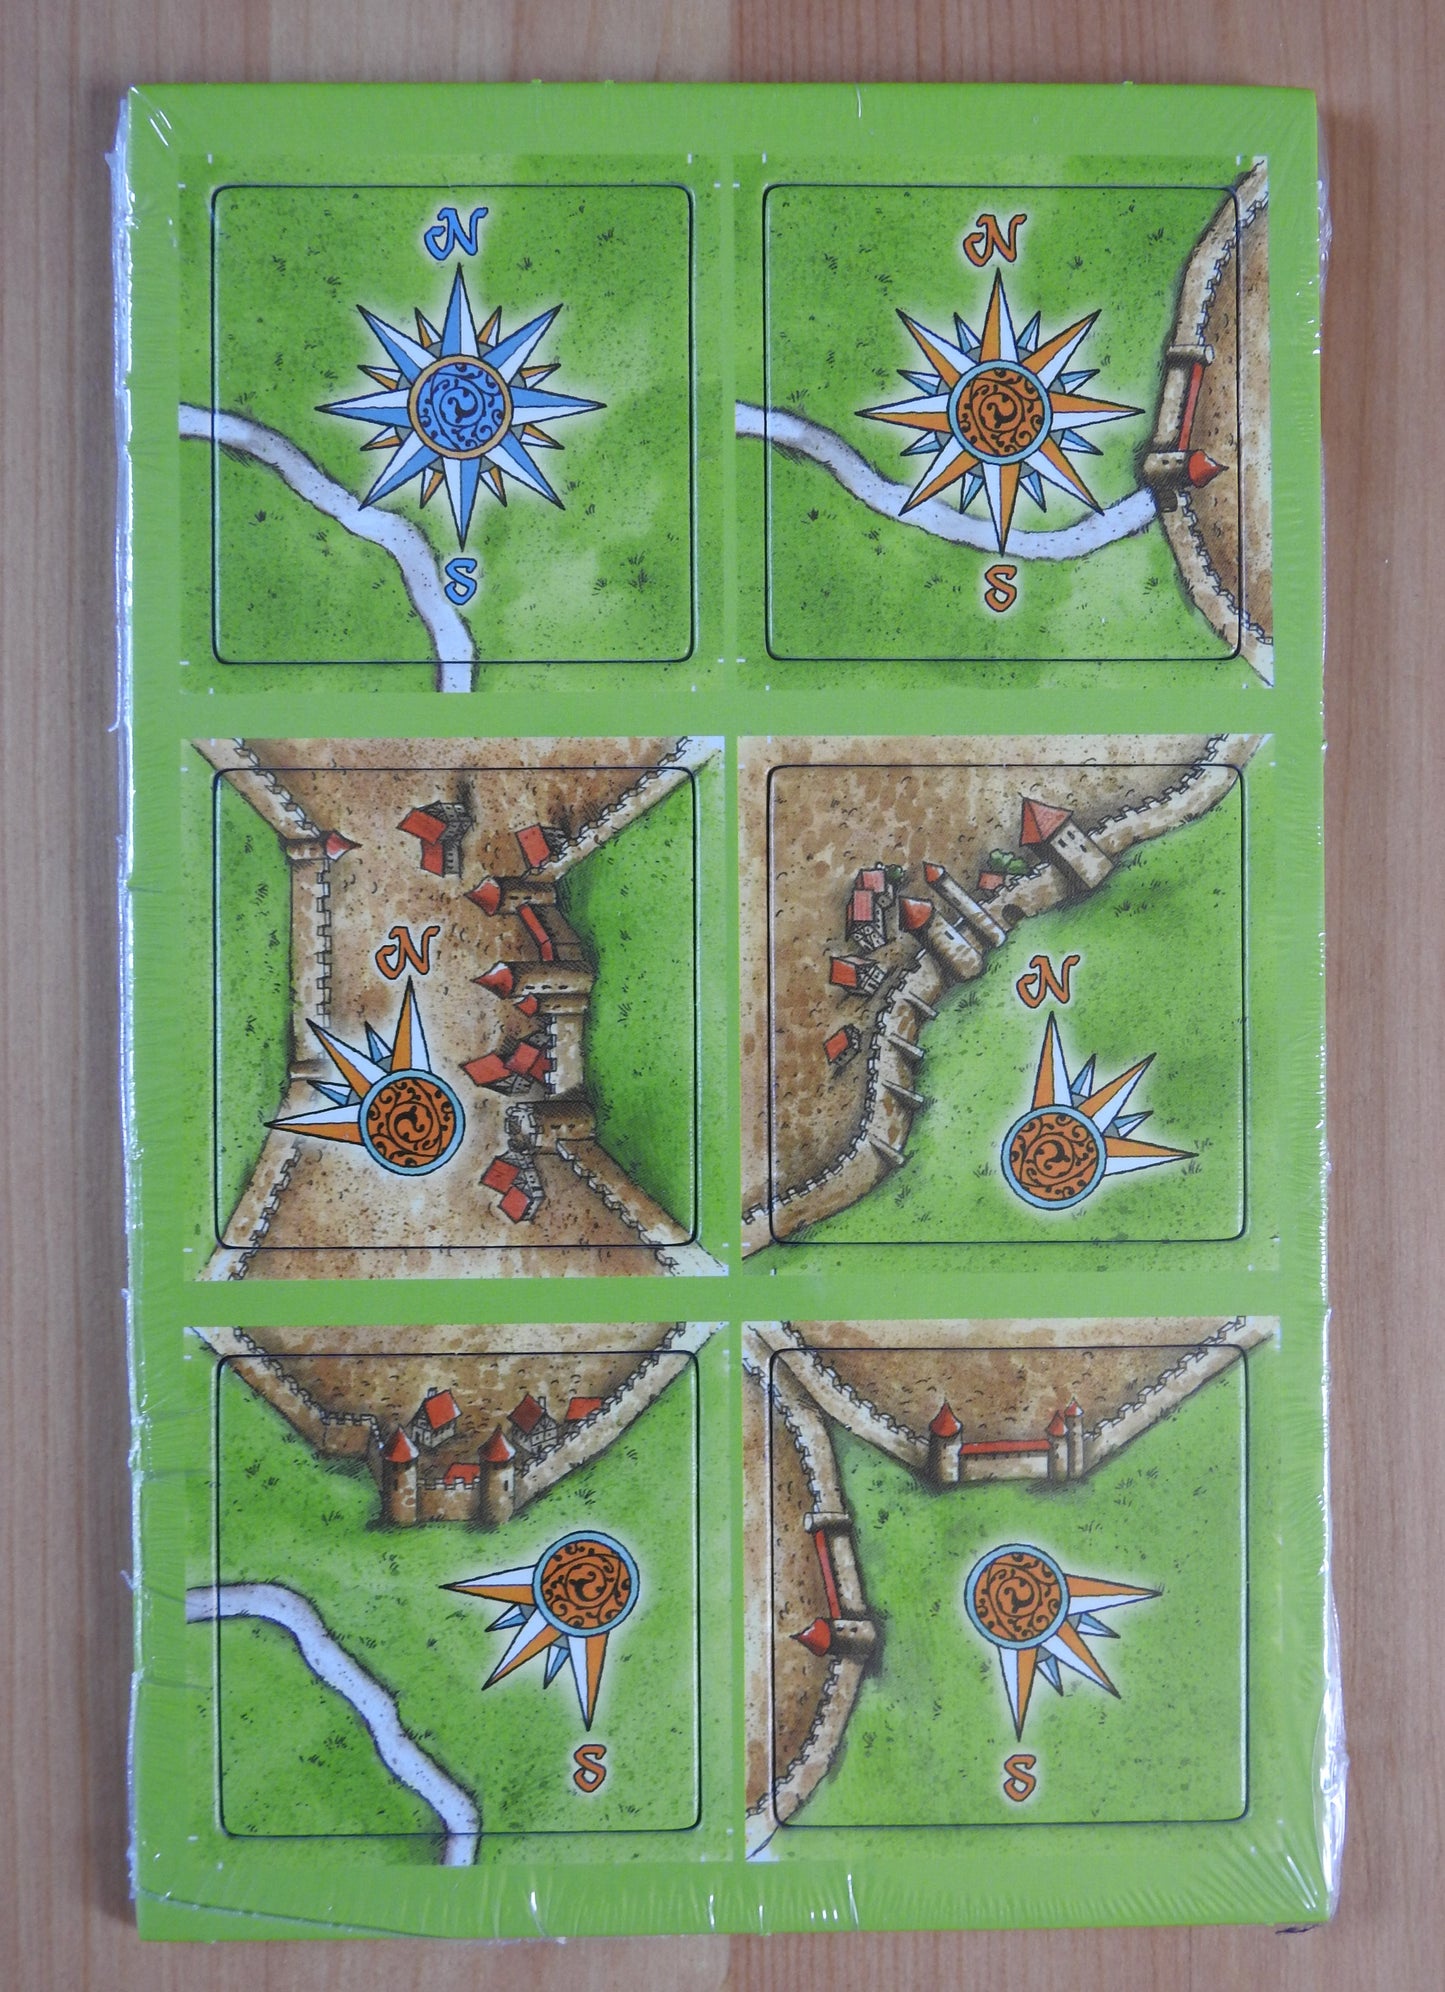 Top view of the 6 windroses tiles making up the Windroses Carcassonne Mini Expansion.